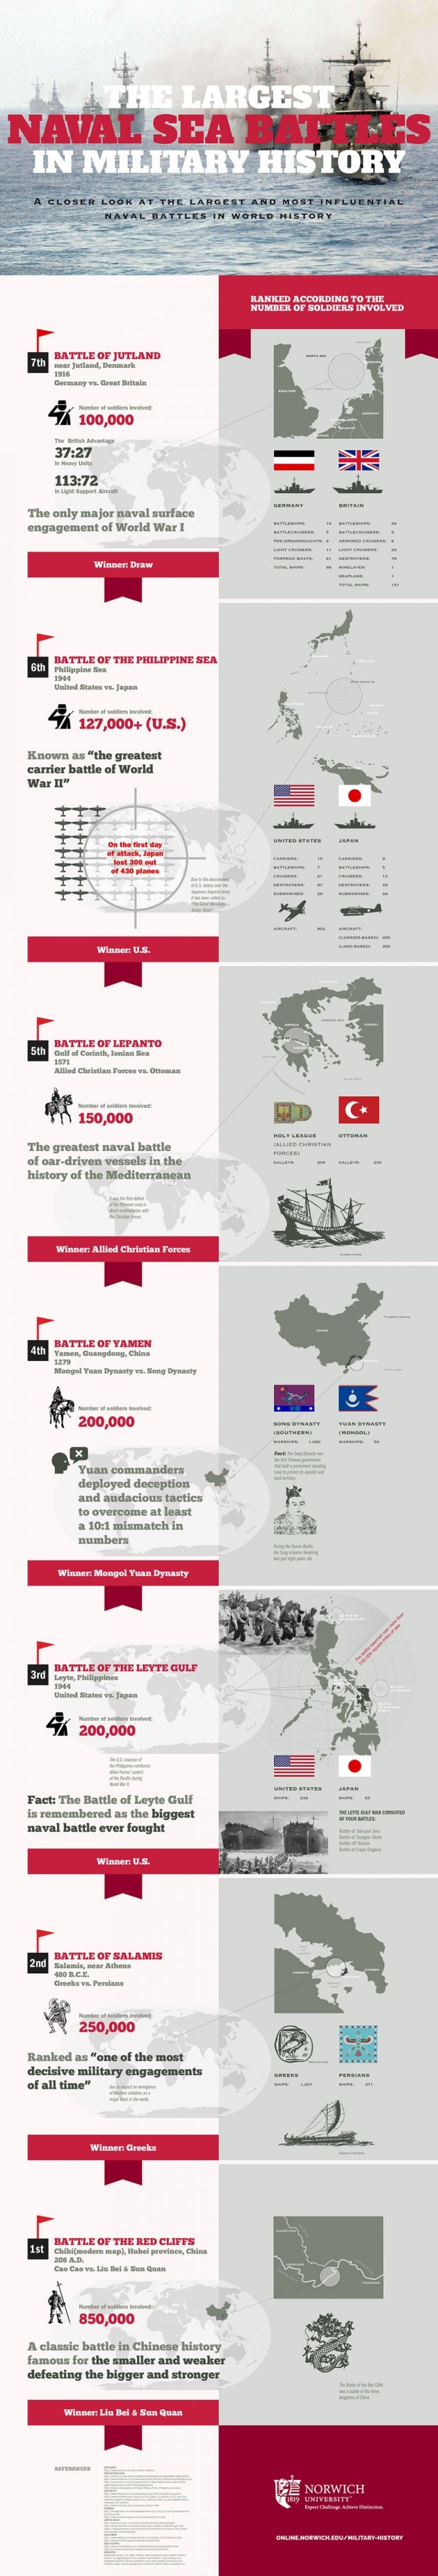 infographic - largest naval sea battles